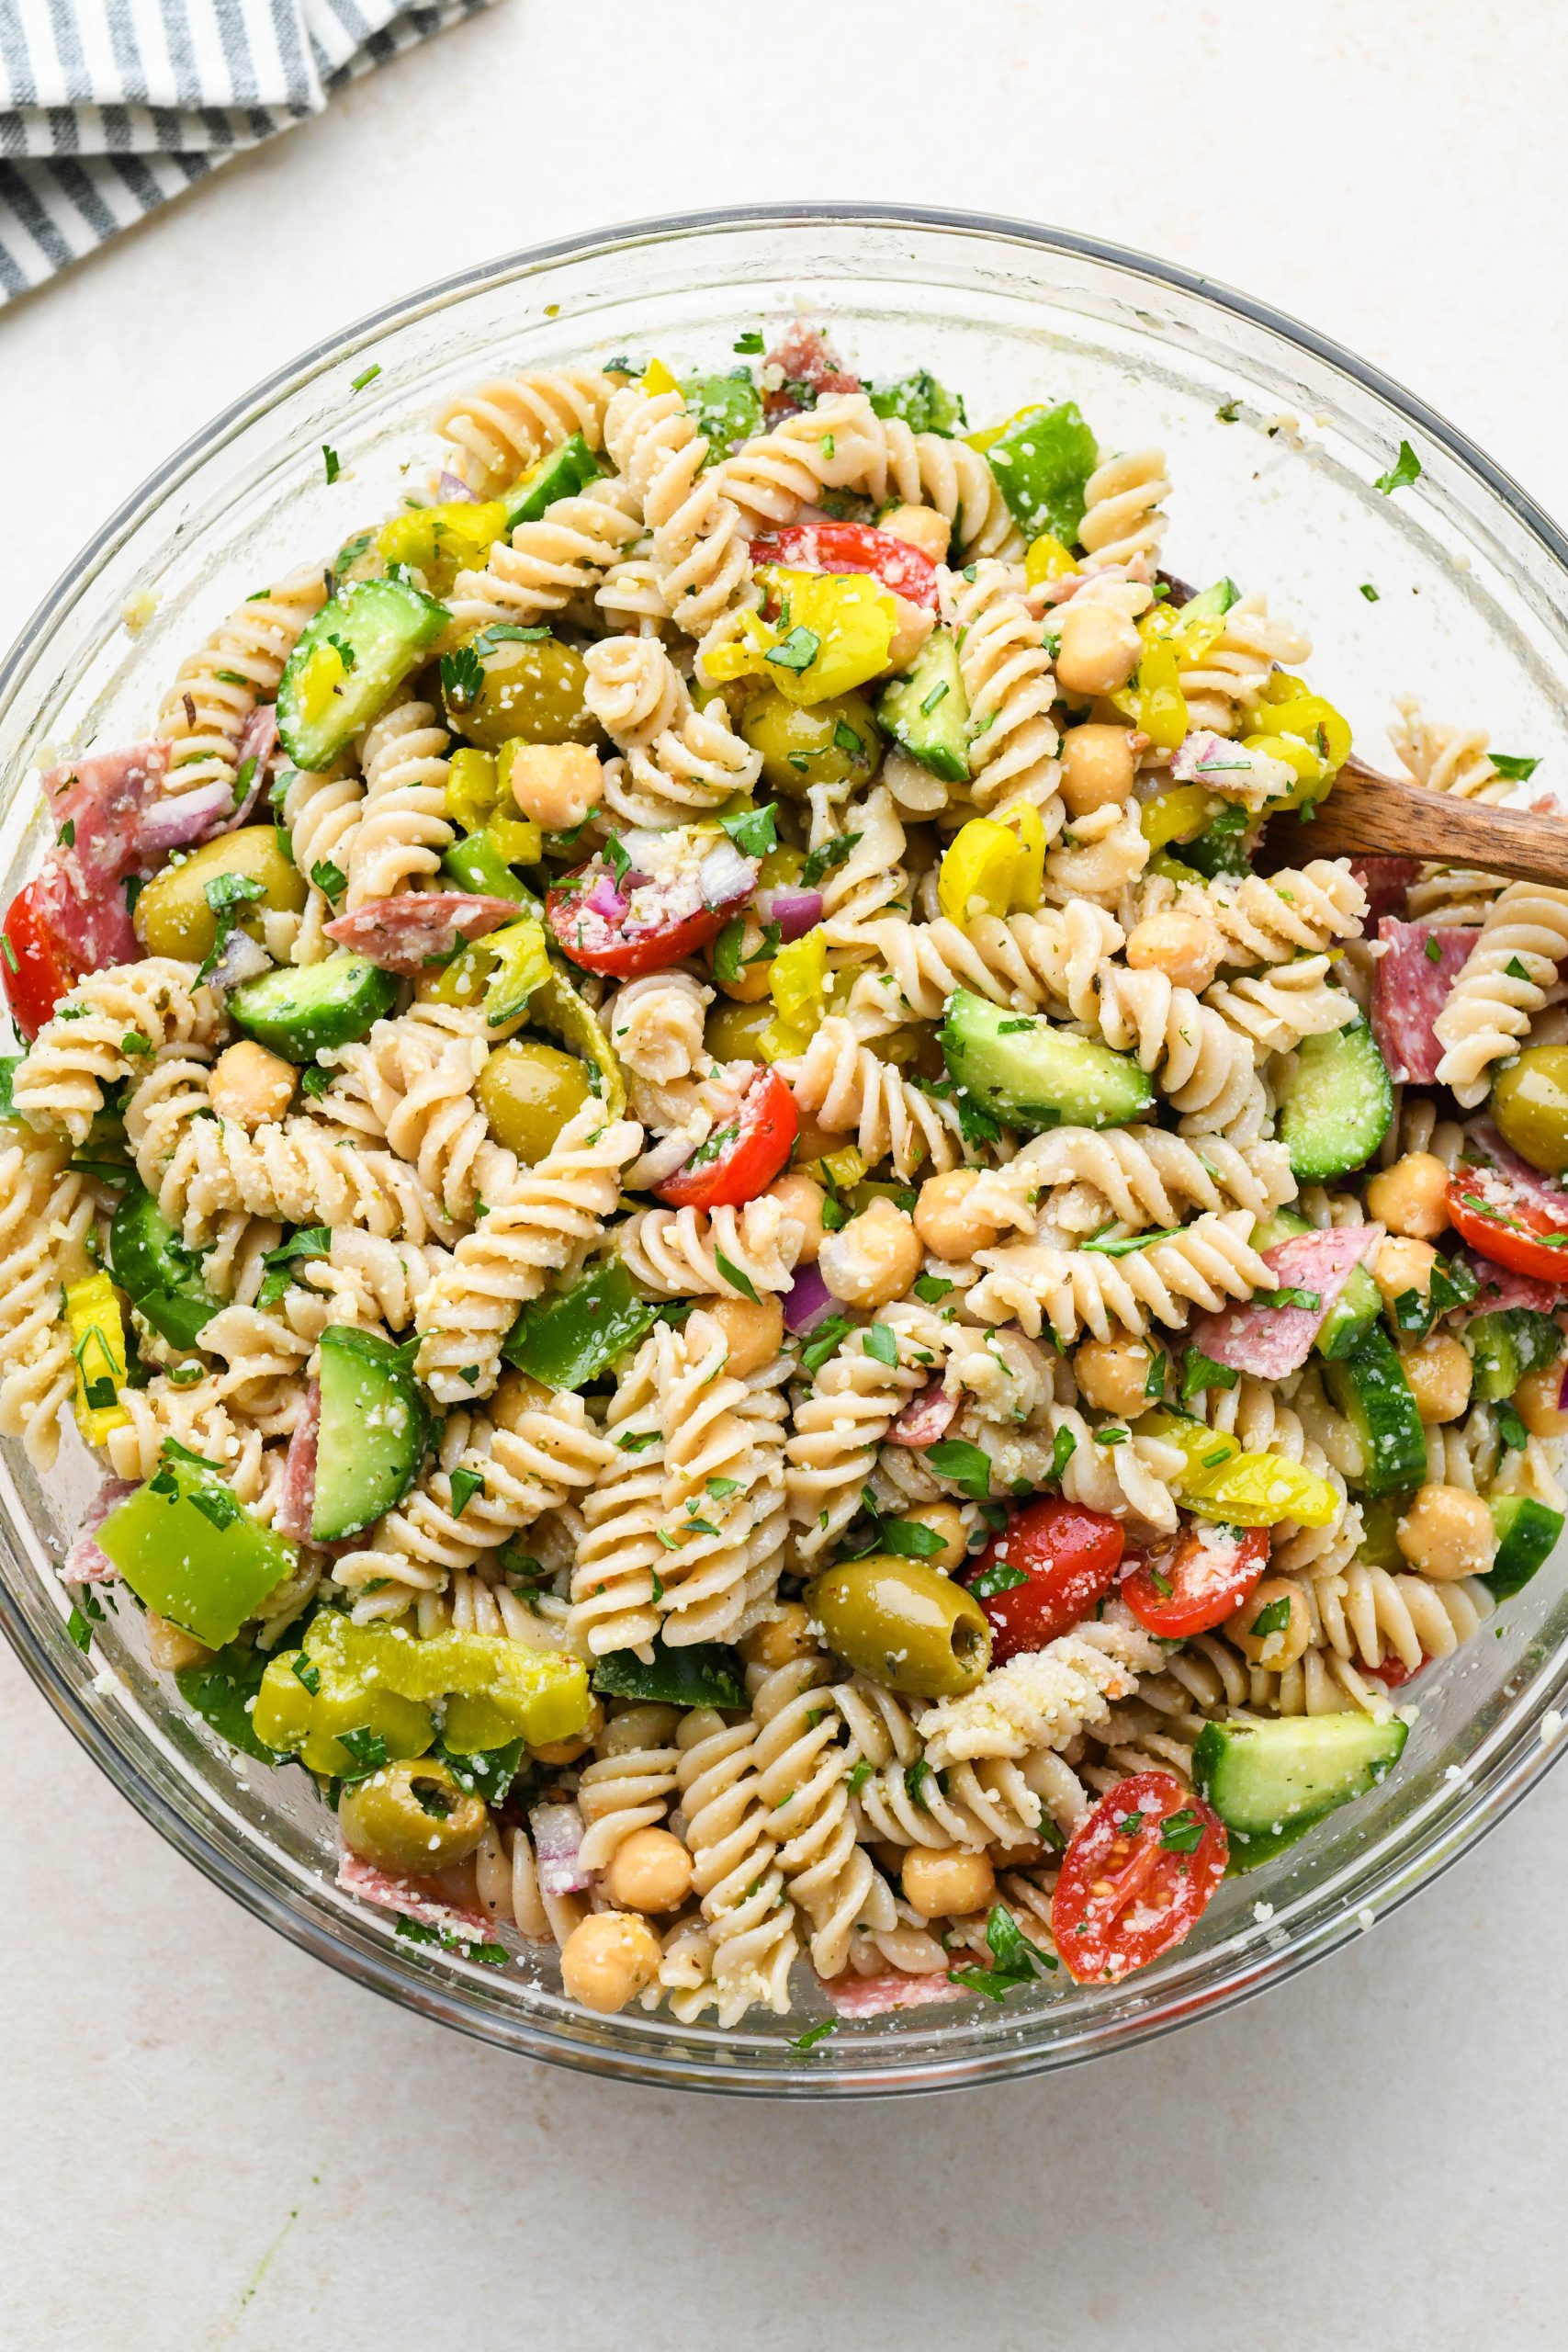 How to make Easy Gluten Free Italian Pasta Salad: Pasta salad tossed together with dressing.